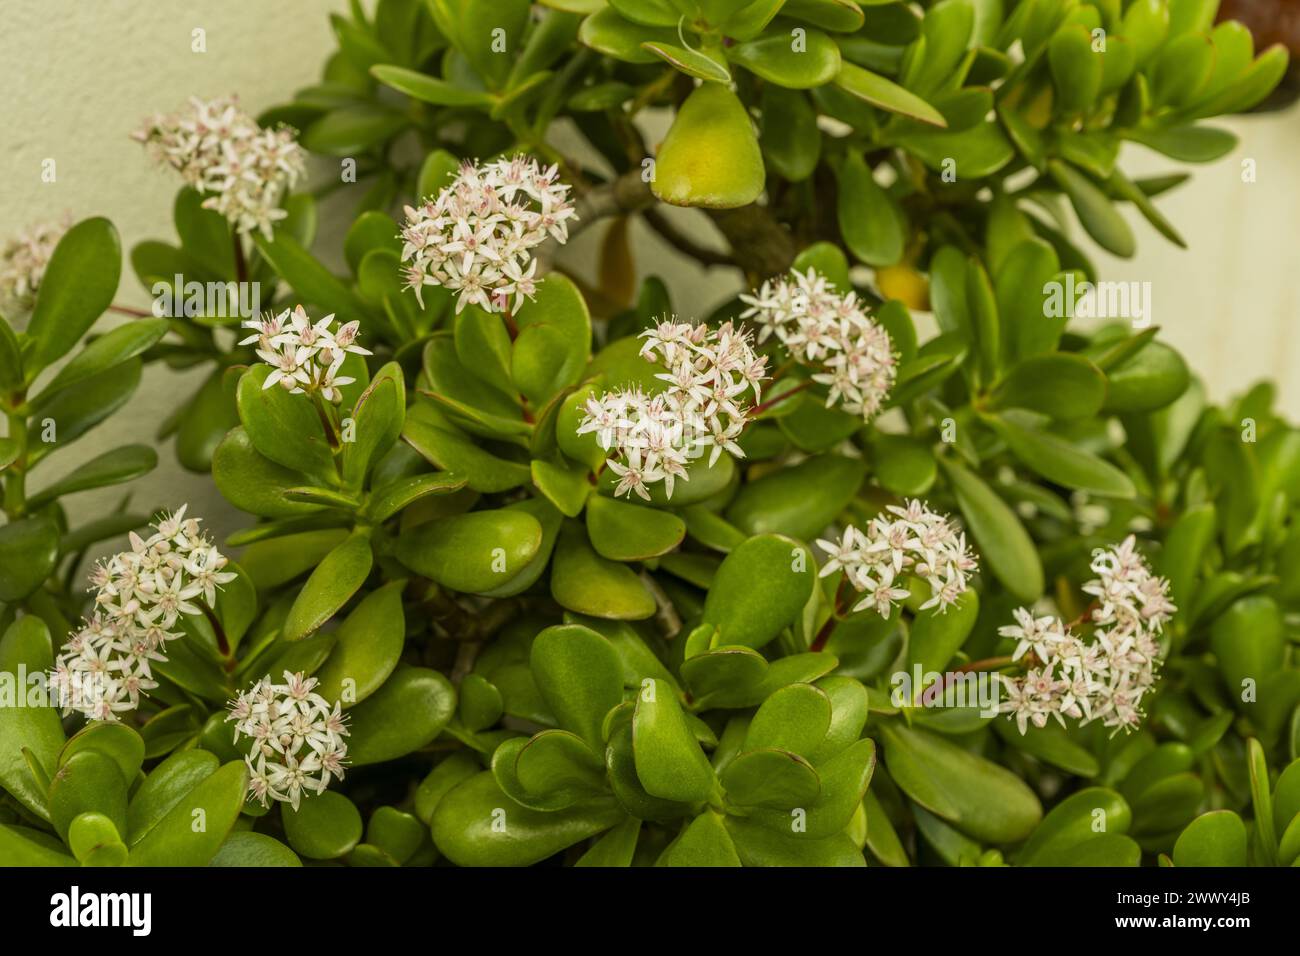 White flowers of a jade plant Stock Photo